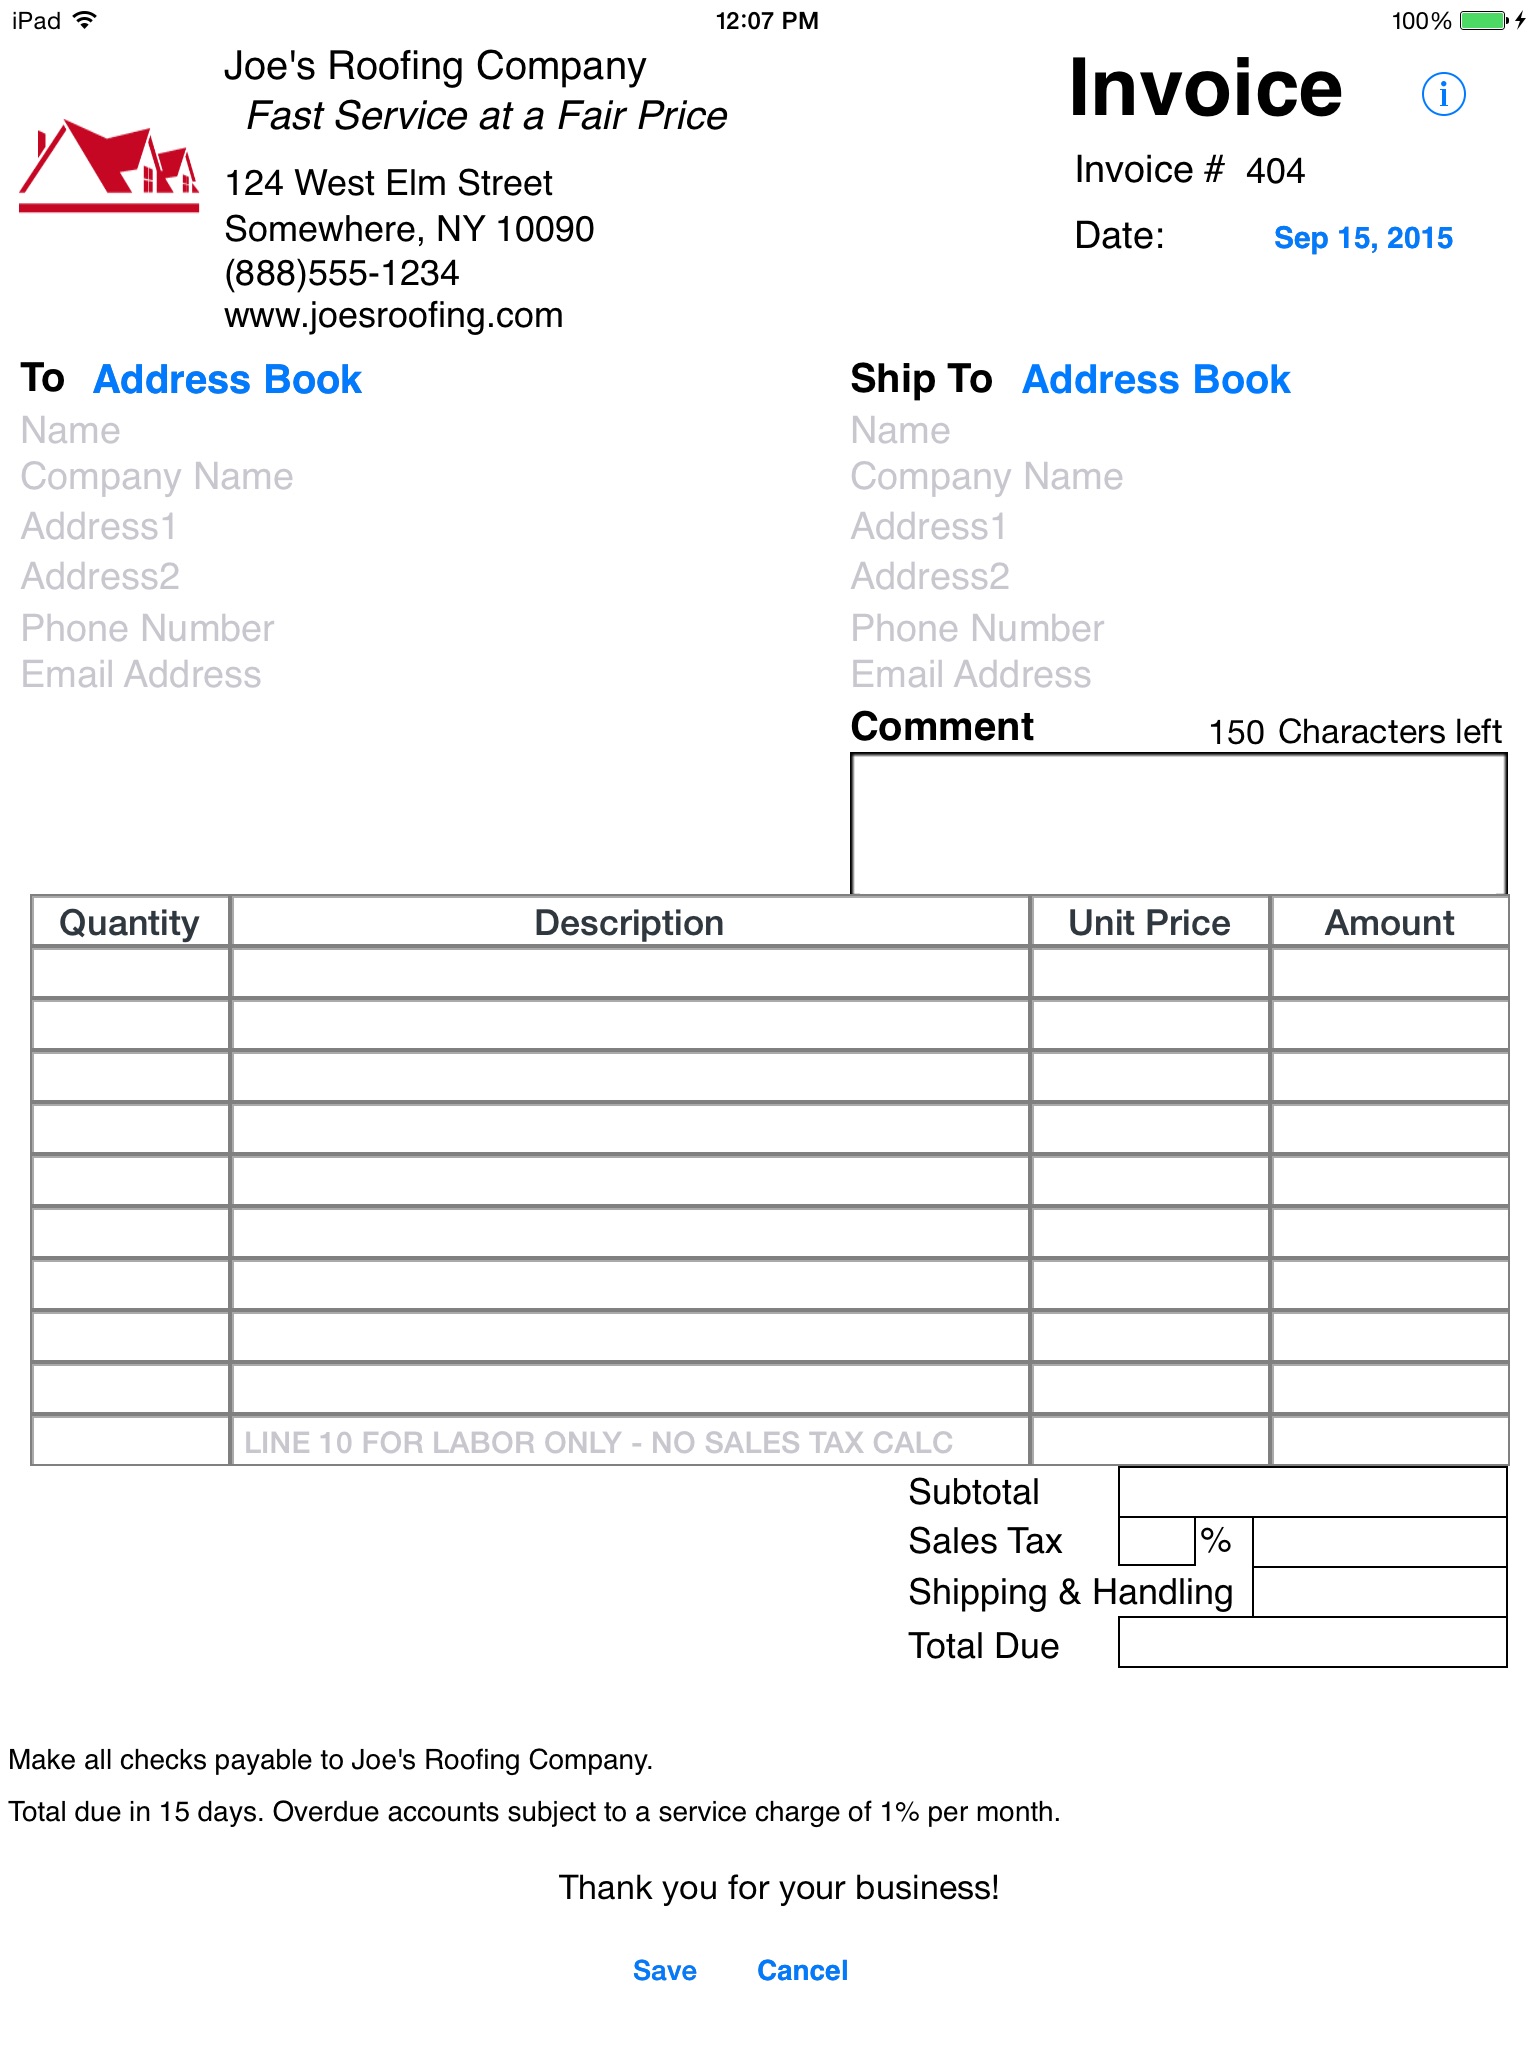 Simple Invoices - Sales screenshot 2